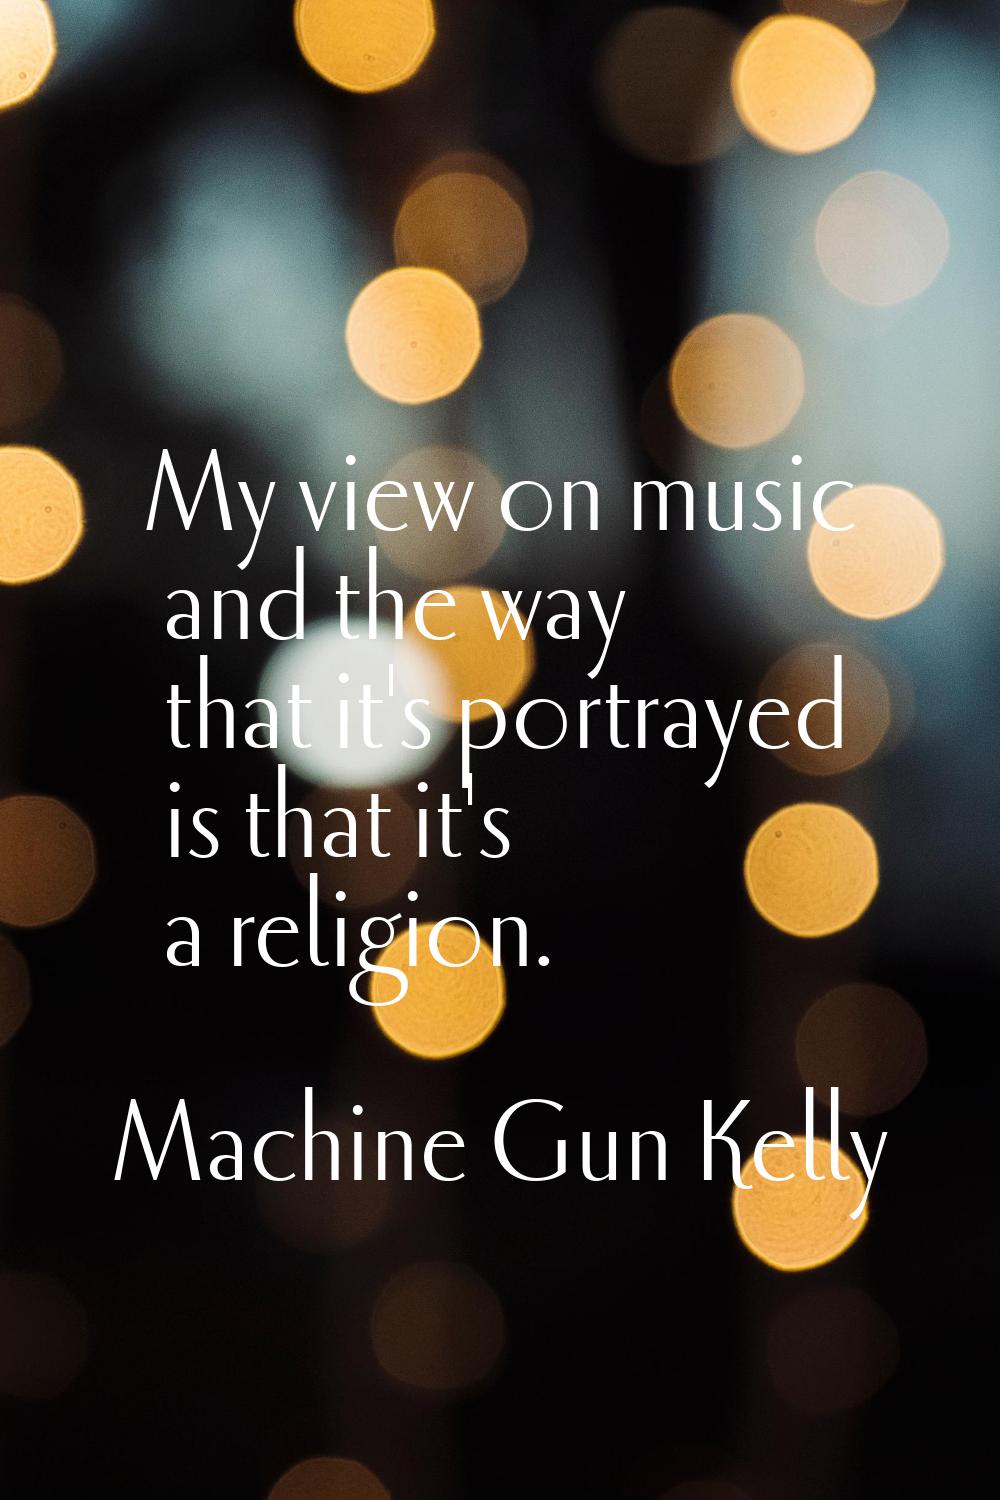 My view on music and the way that it's portrayed is that it's a religion.